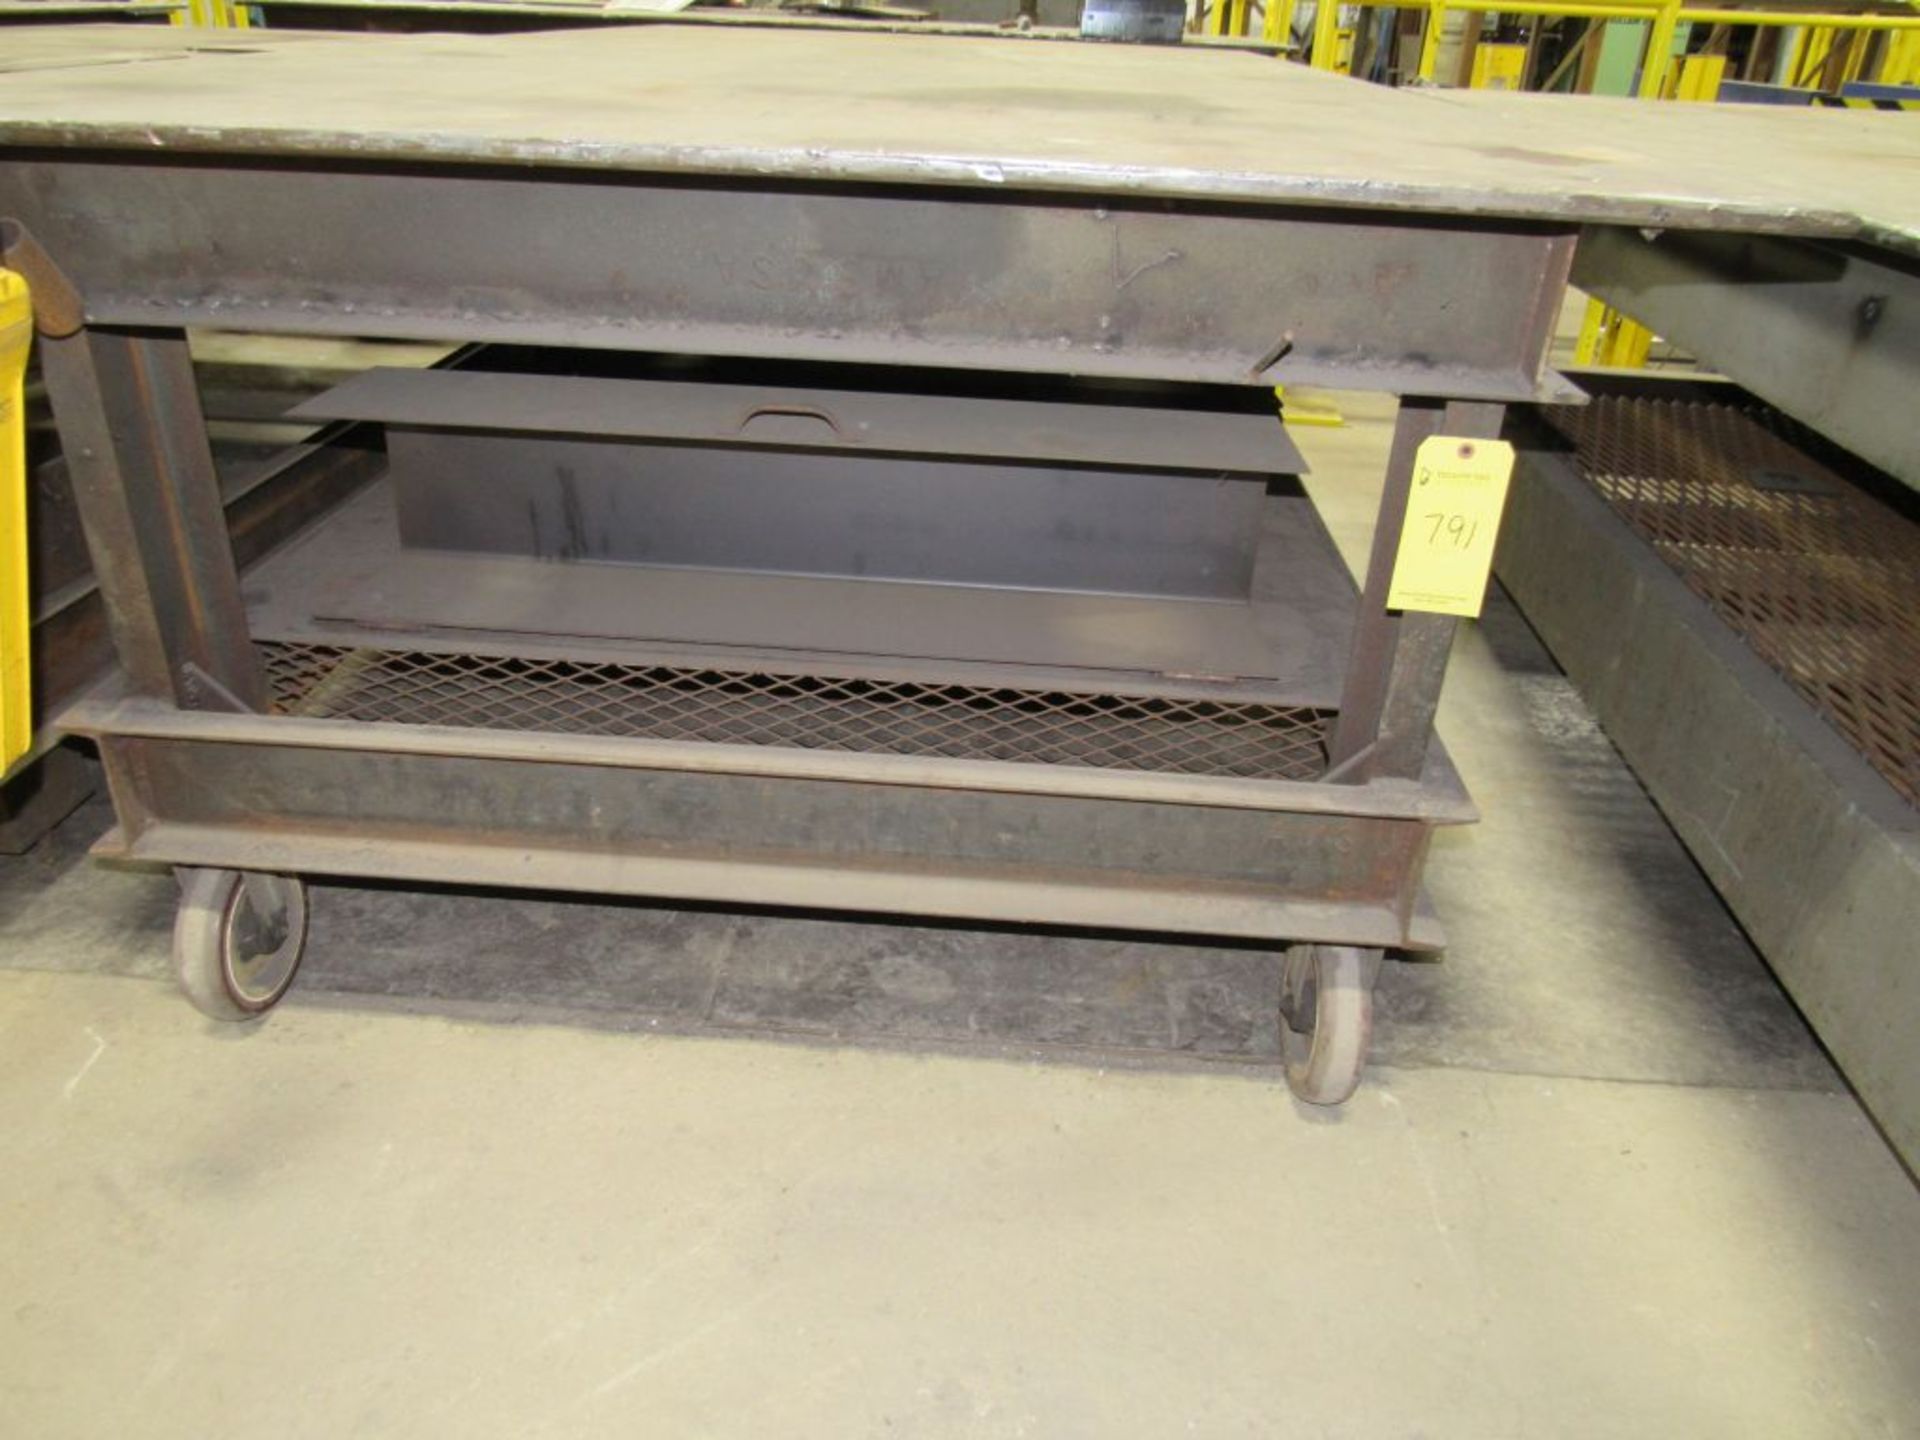 Rolling Steel Table|120"L x 60"W; Tag: 234791 - Image 2 of 2